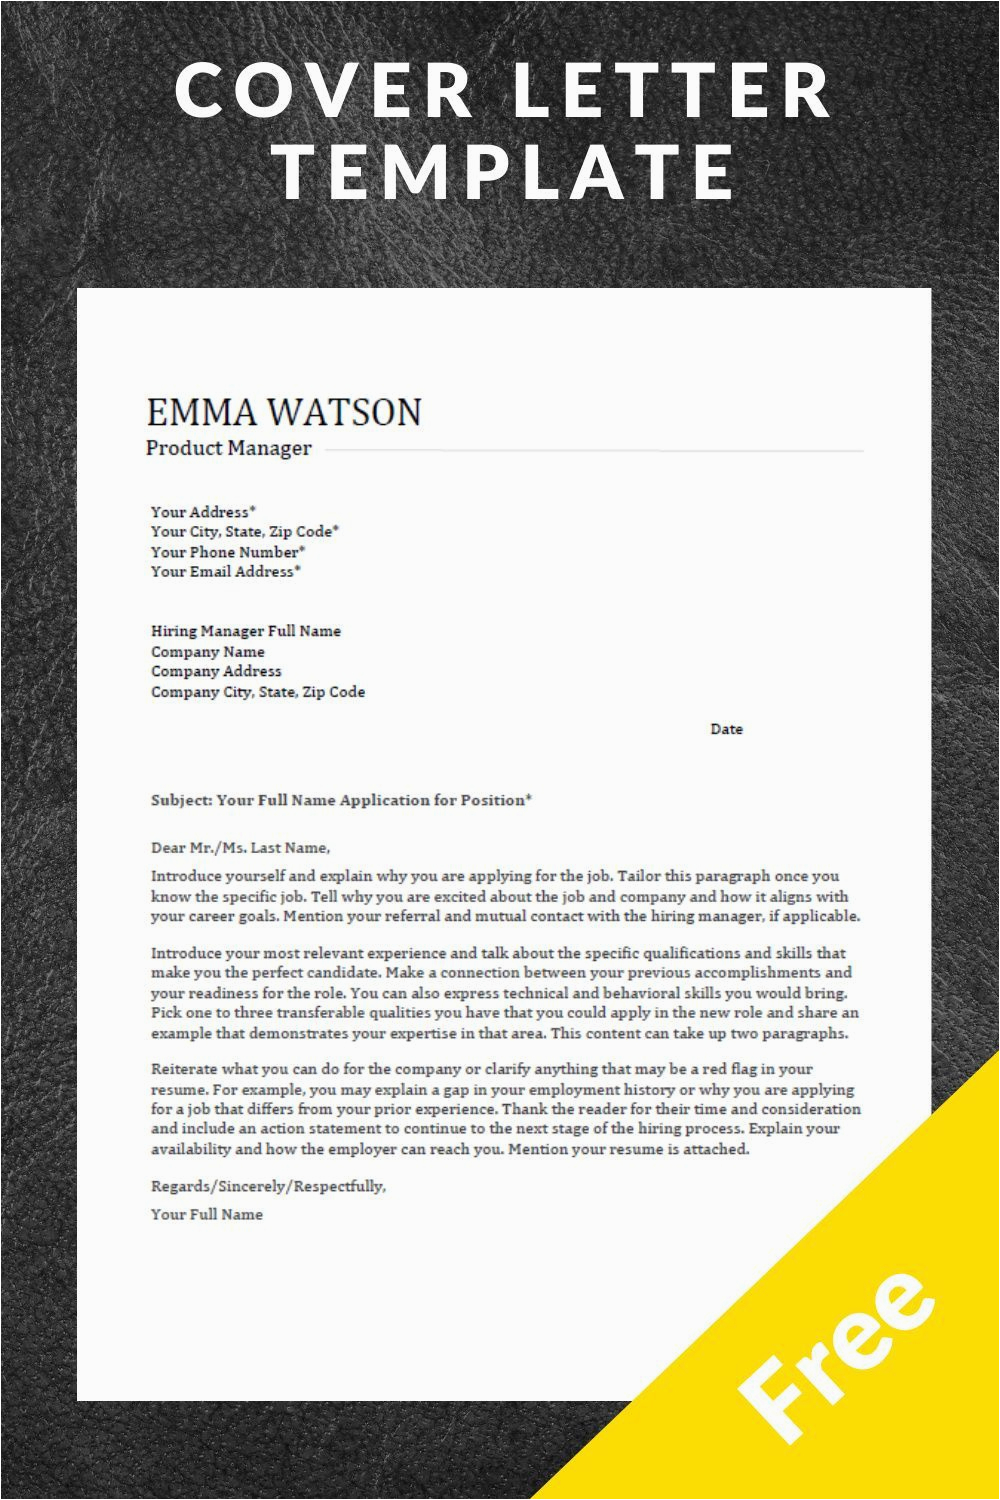 Free Online Resume Cover Letter Template Cover Letter Template Download for Free